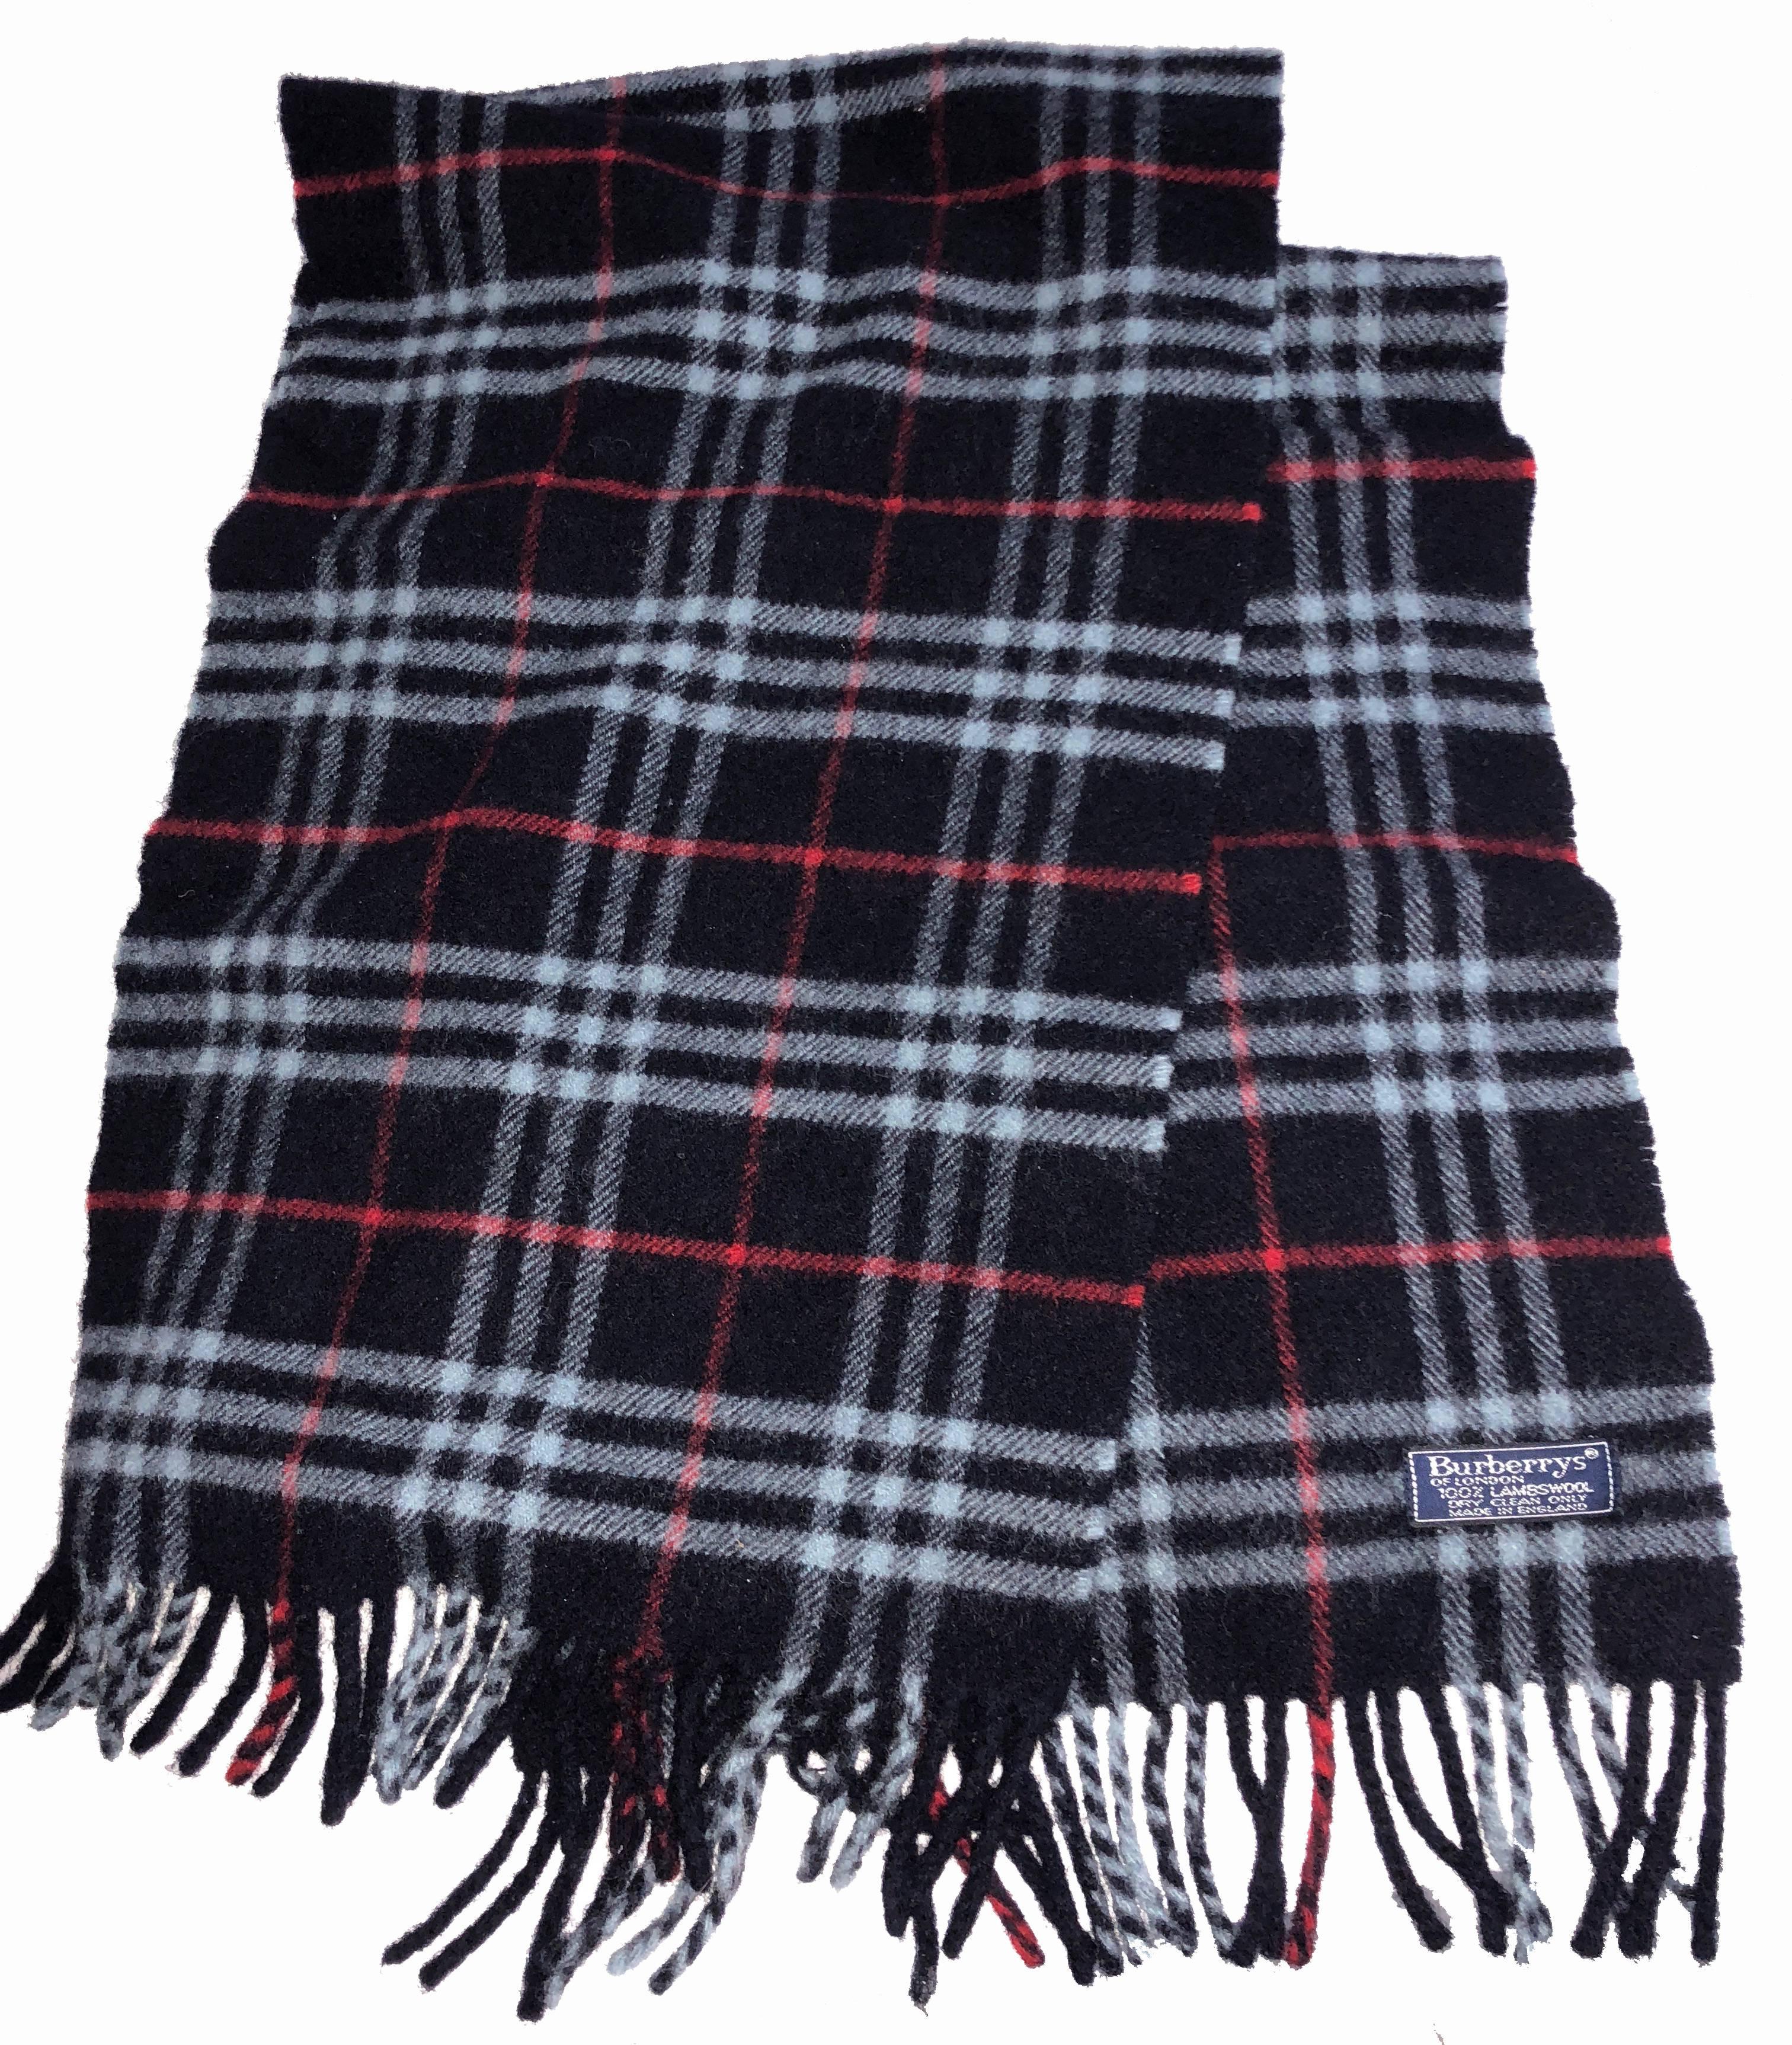 Women's or Men's Burberrys London Lambswool Scarf Blue Red White Plaid Check with Fringe